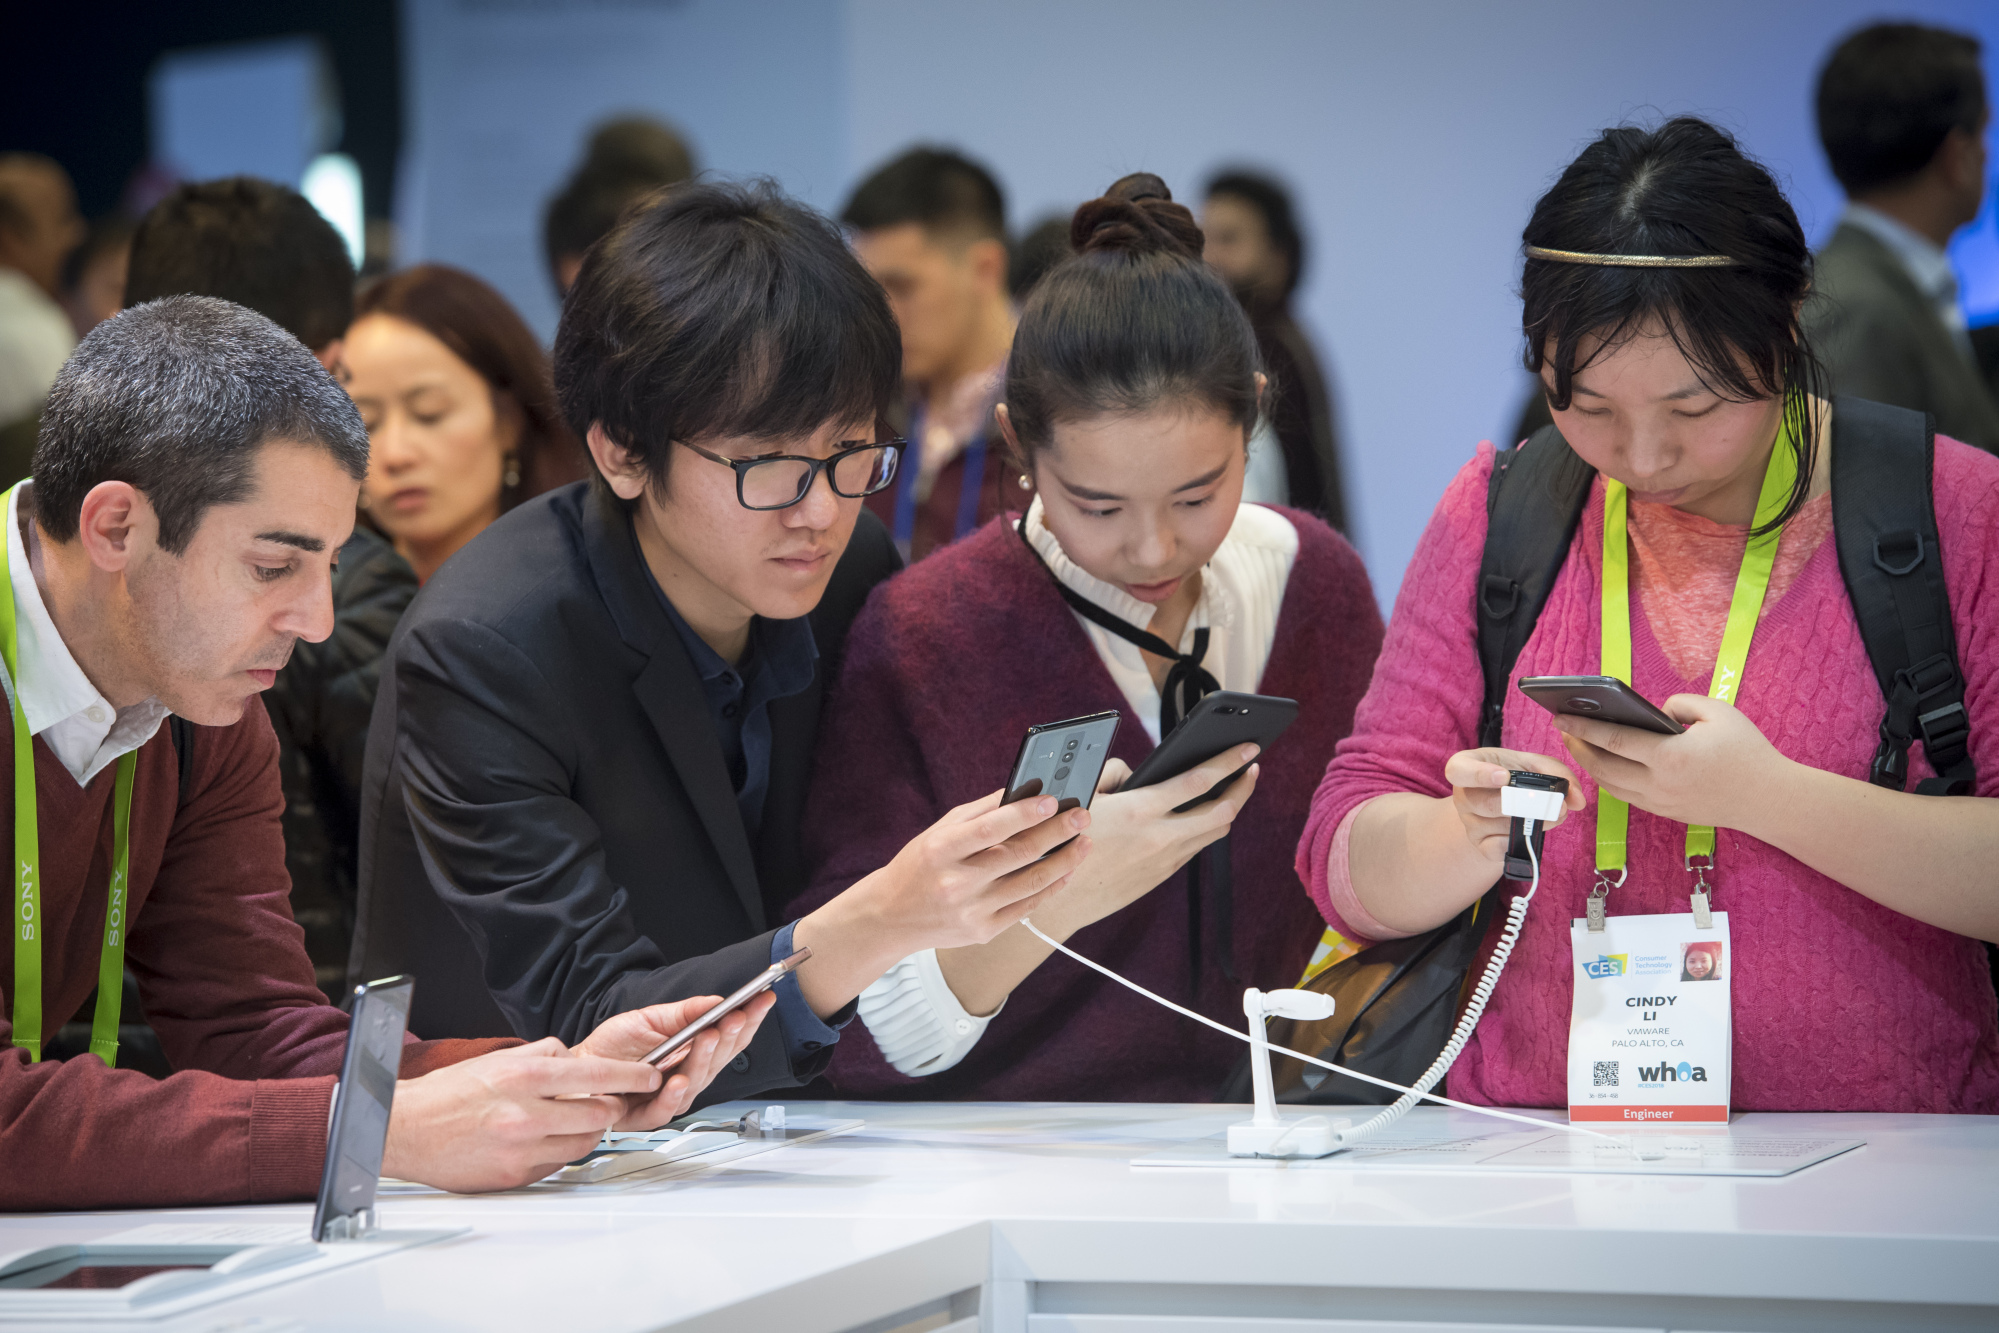 Attendees view the Huawei Technologies Mate 10 Pro smartphone during CES&nbsp;in Las Vegas on Jan. 10.